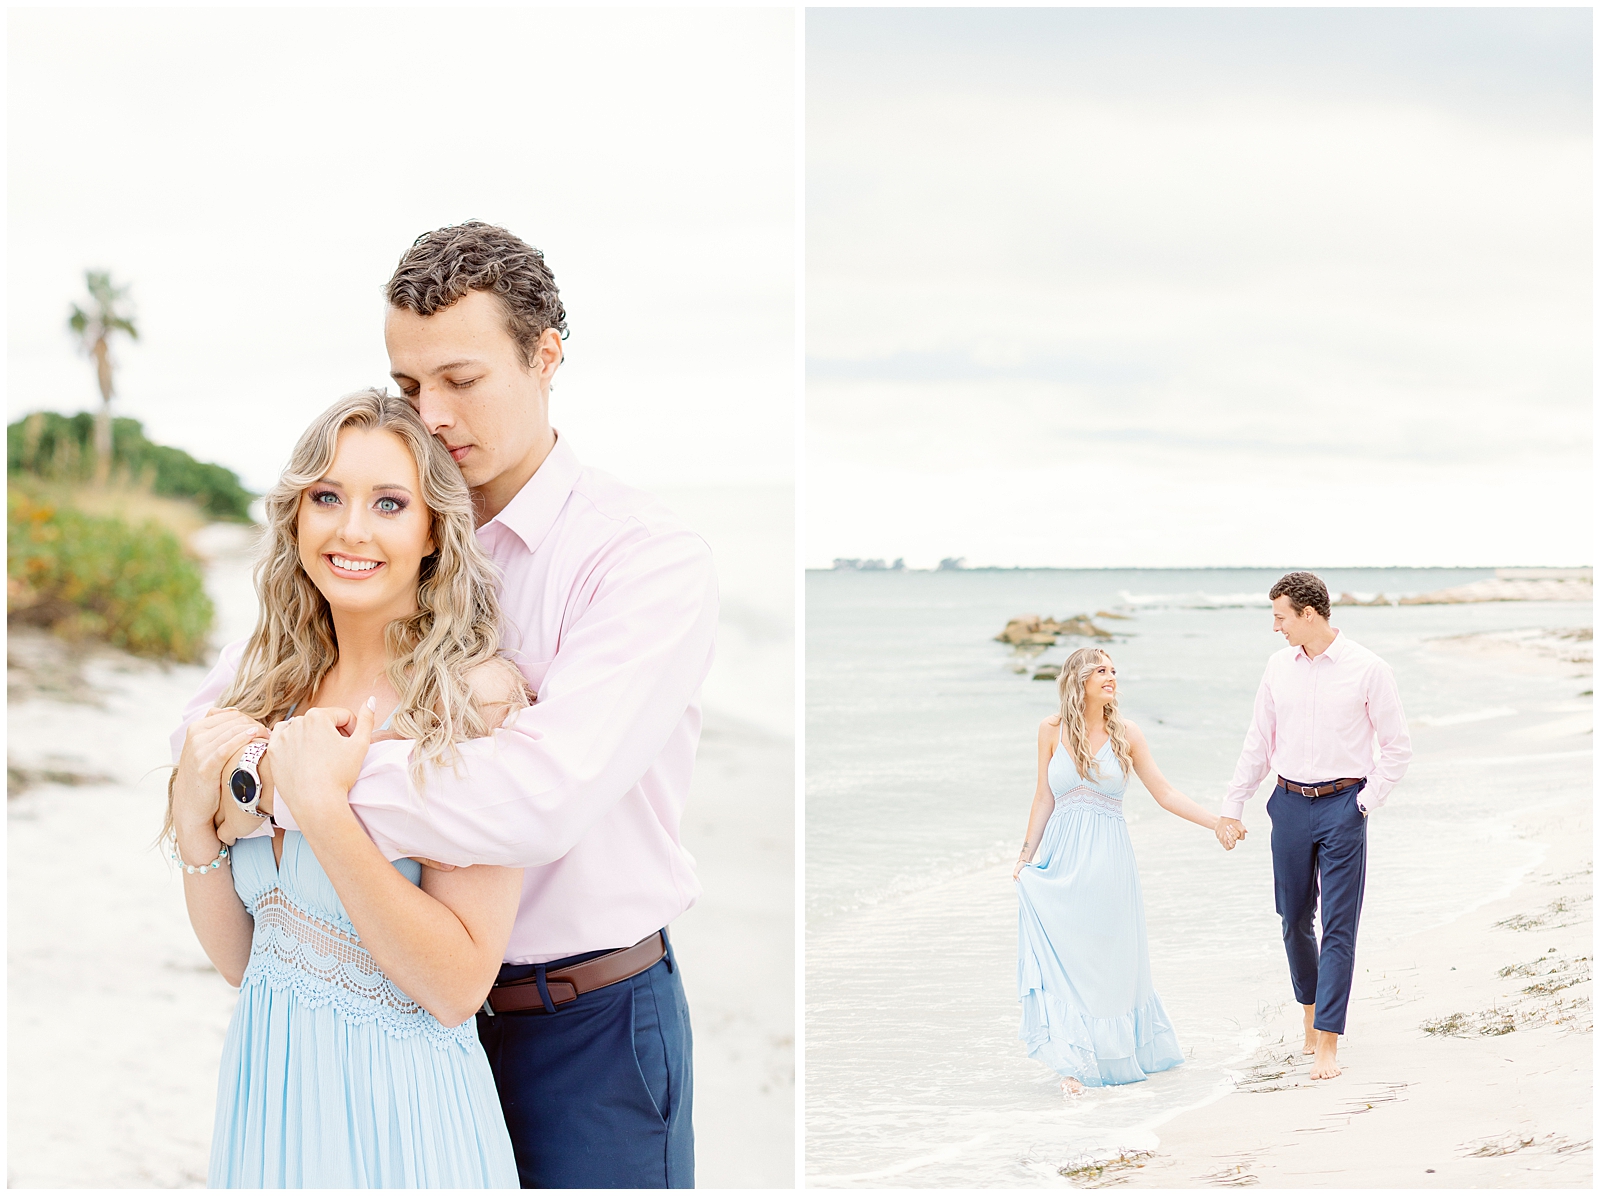 Dreamy Fort Desoto Engagement Session along the Ocean in Tampa Florida